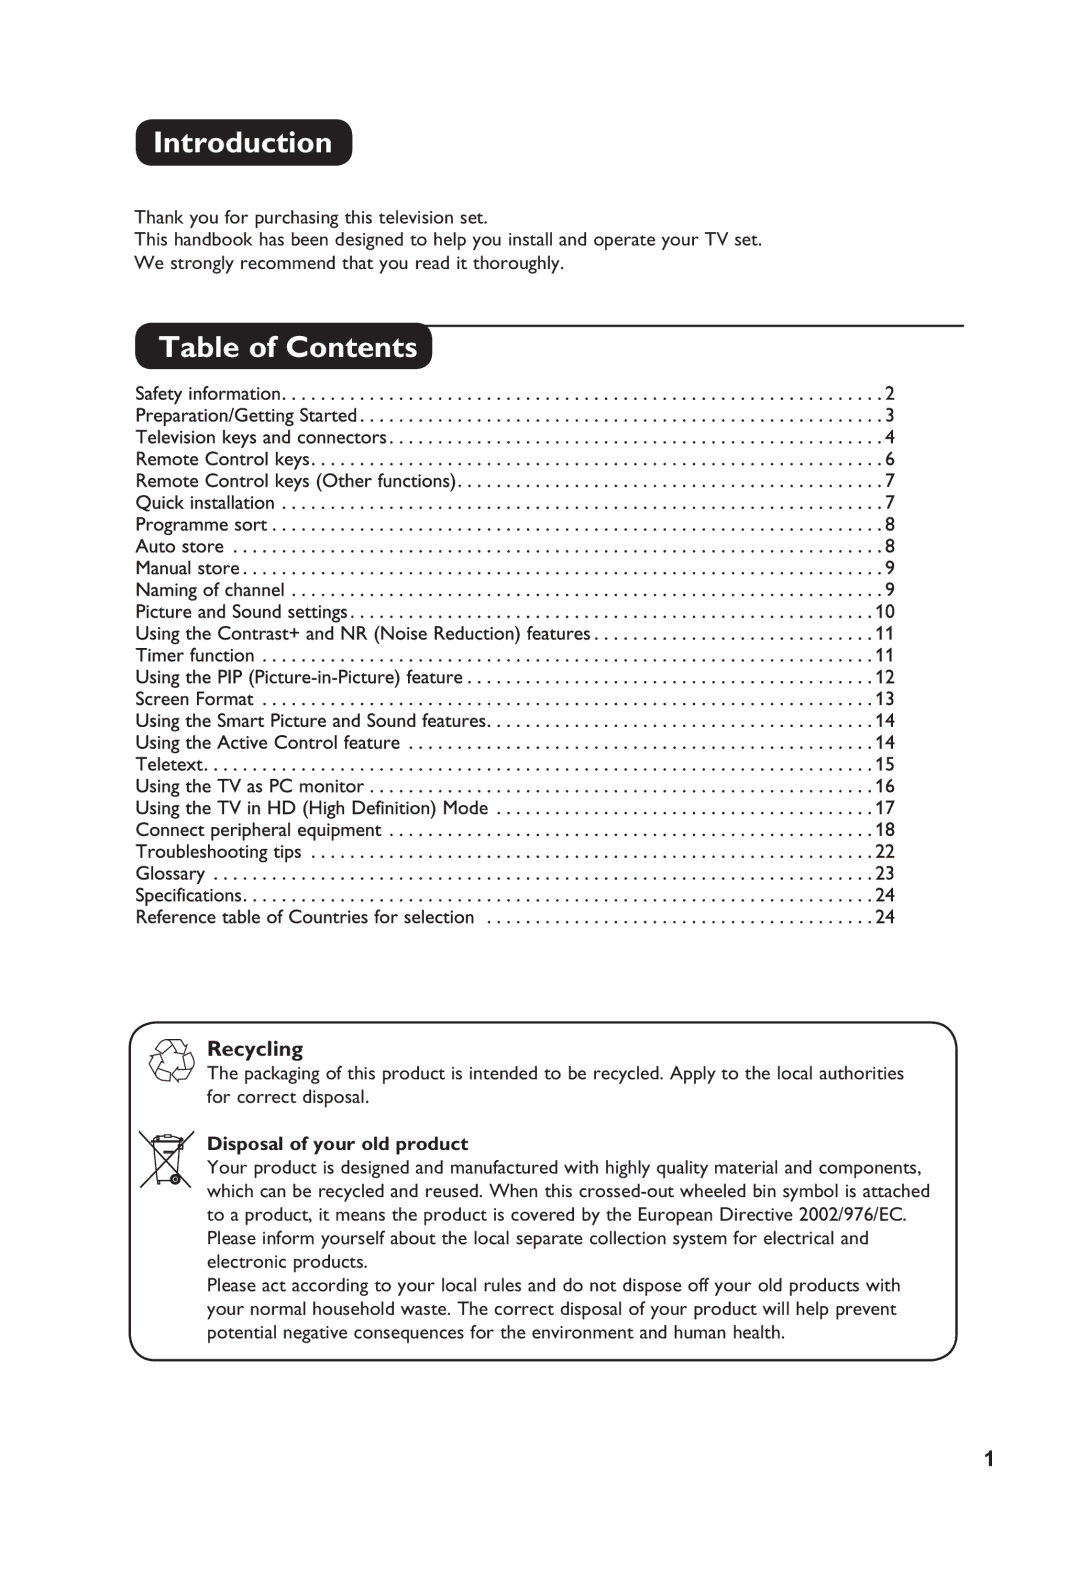 Philips 32PFL3321S user manual Introduction, Table of Contents 